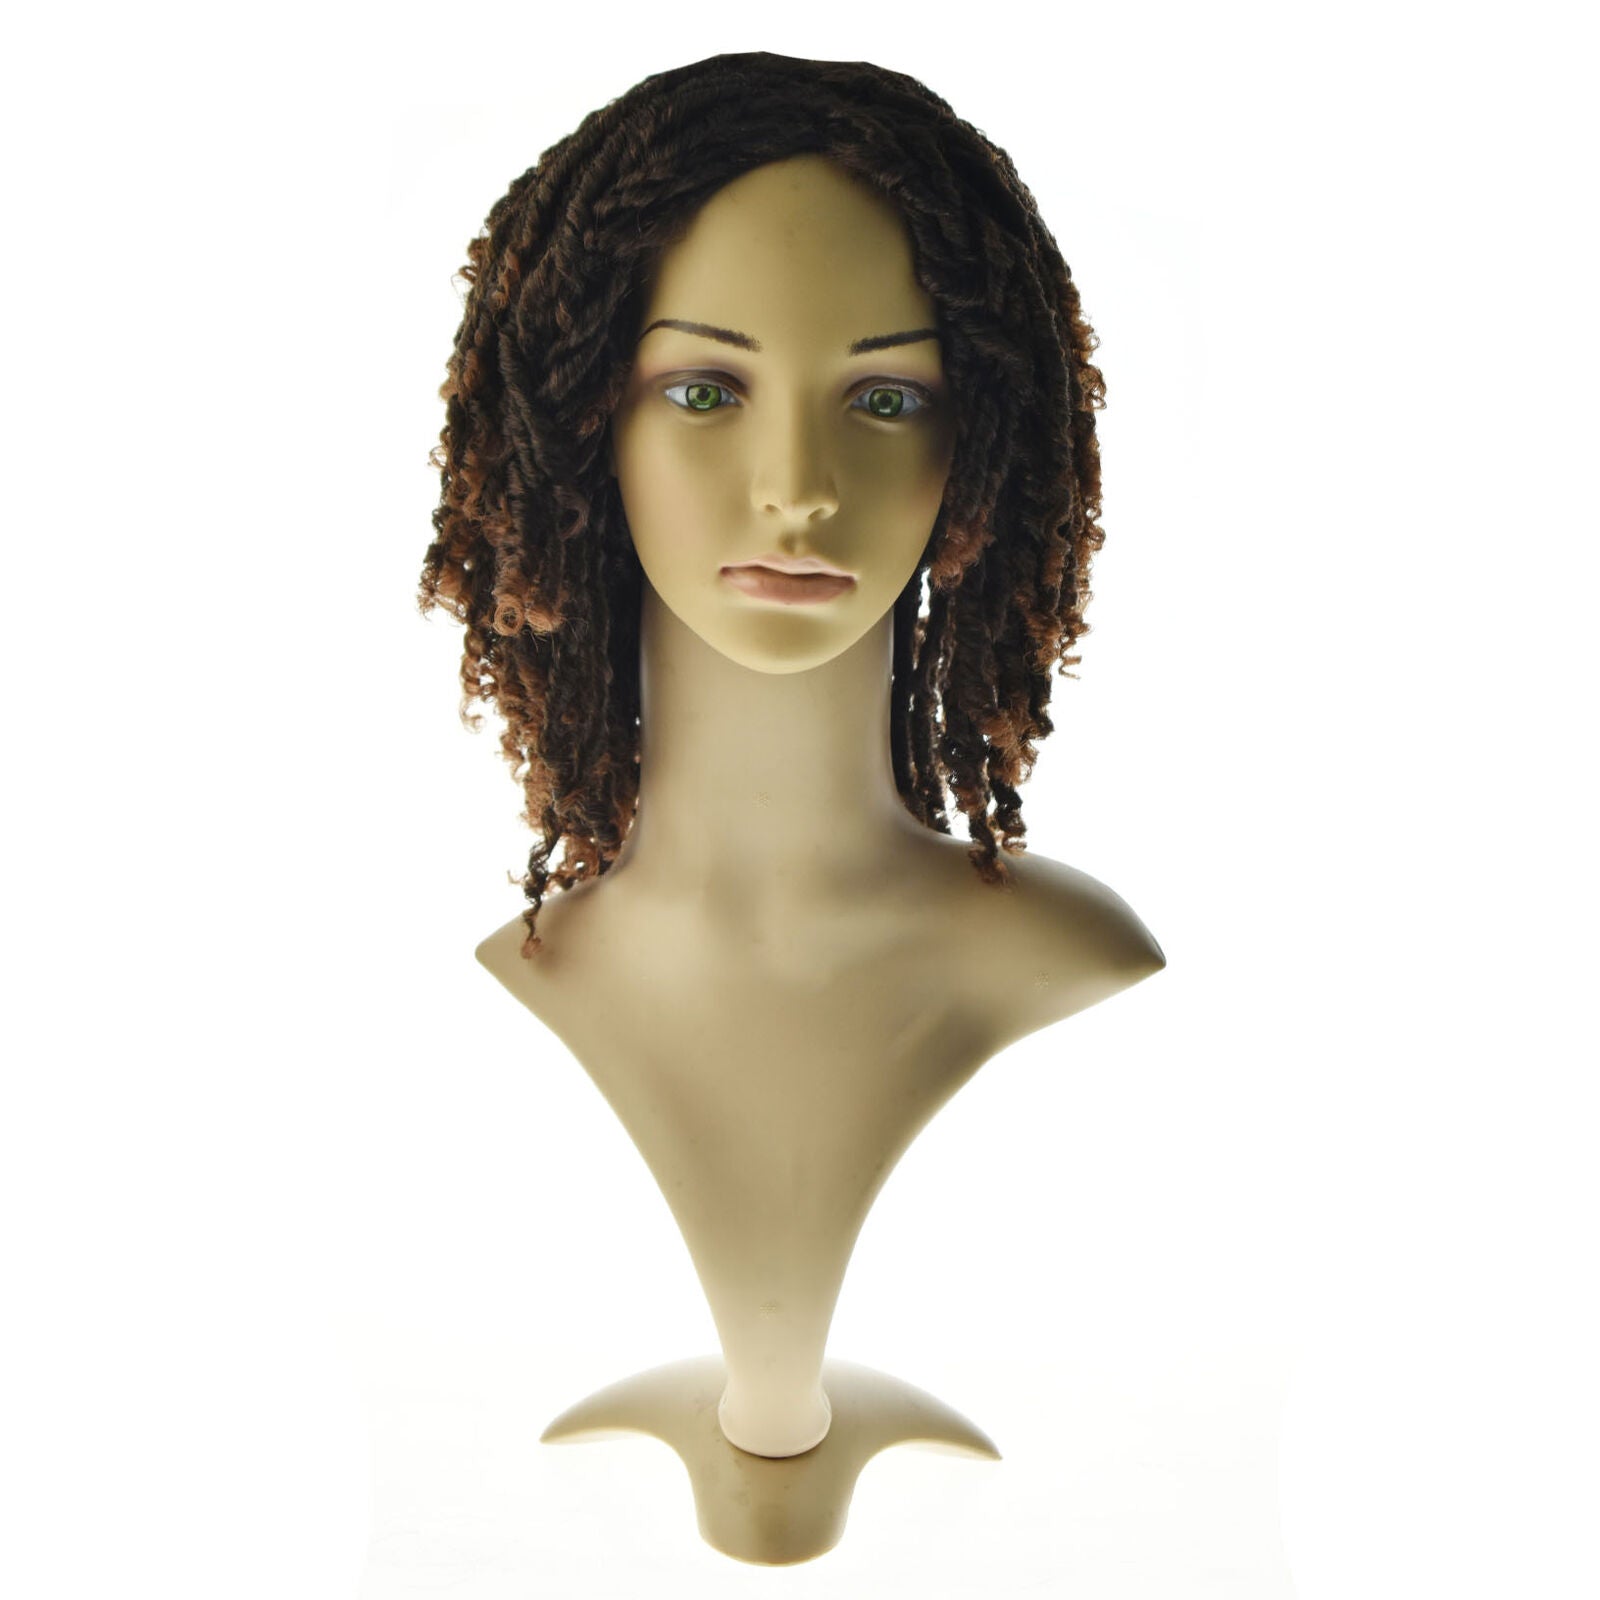 Dreadlock Wig Short Twist Wigs for Black Women and Men Afro Curly Synthetic Wig